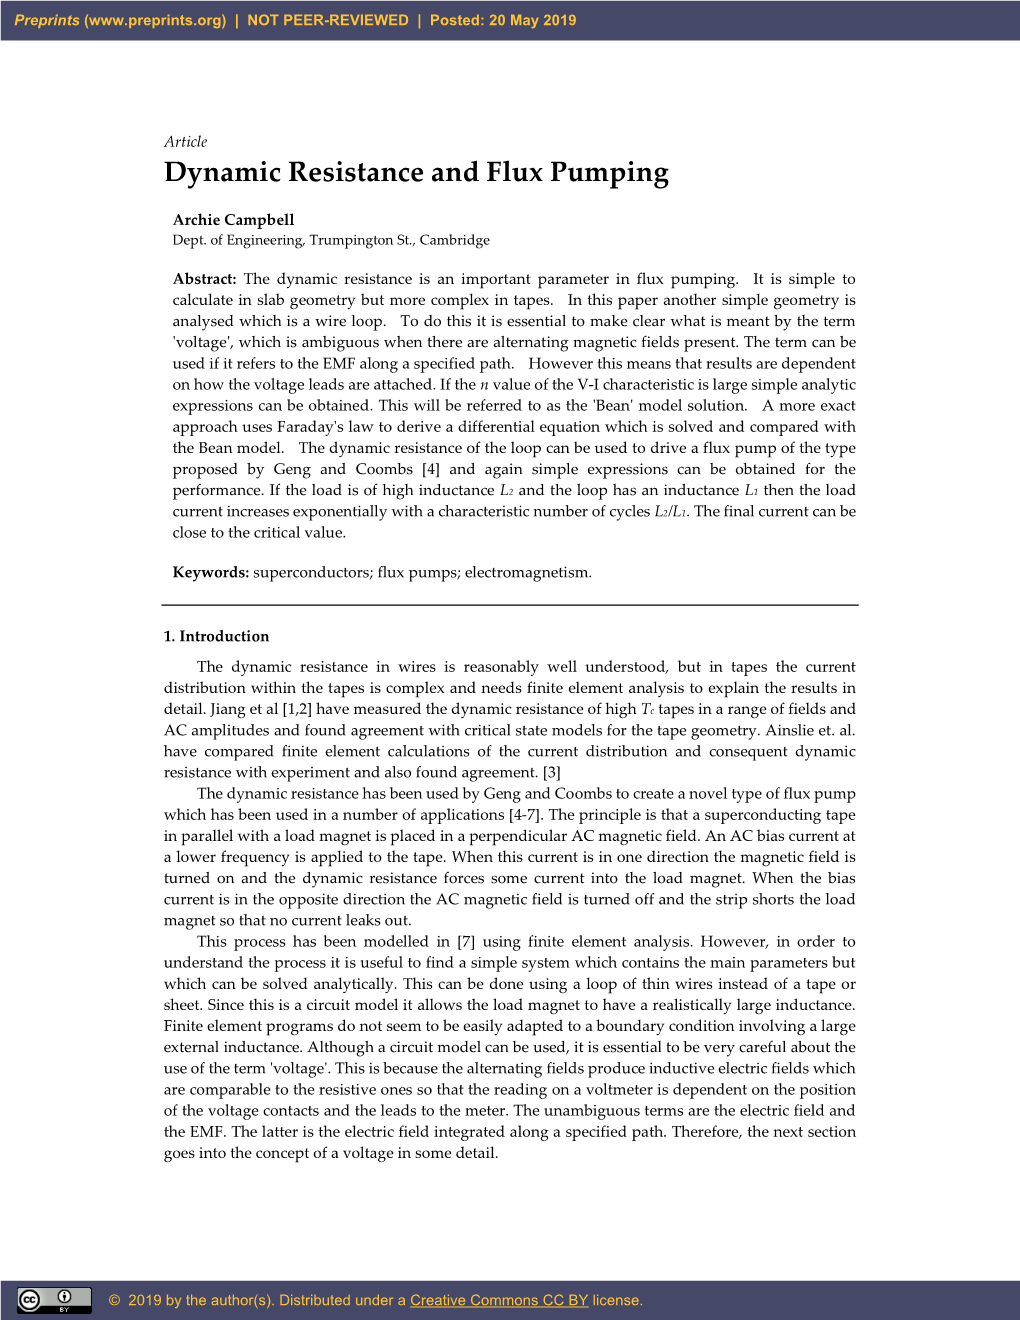 Dynamic Resistance and Flux Pumping